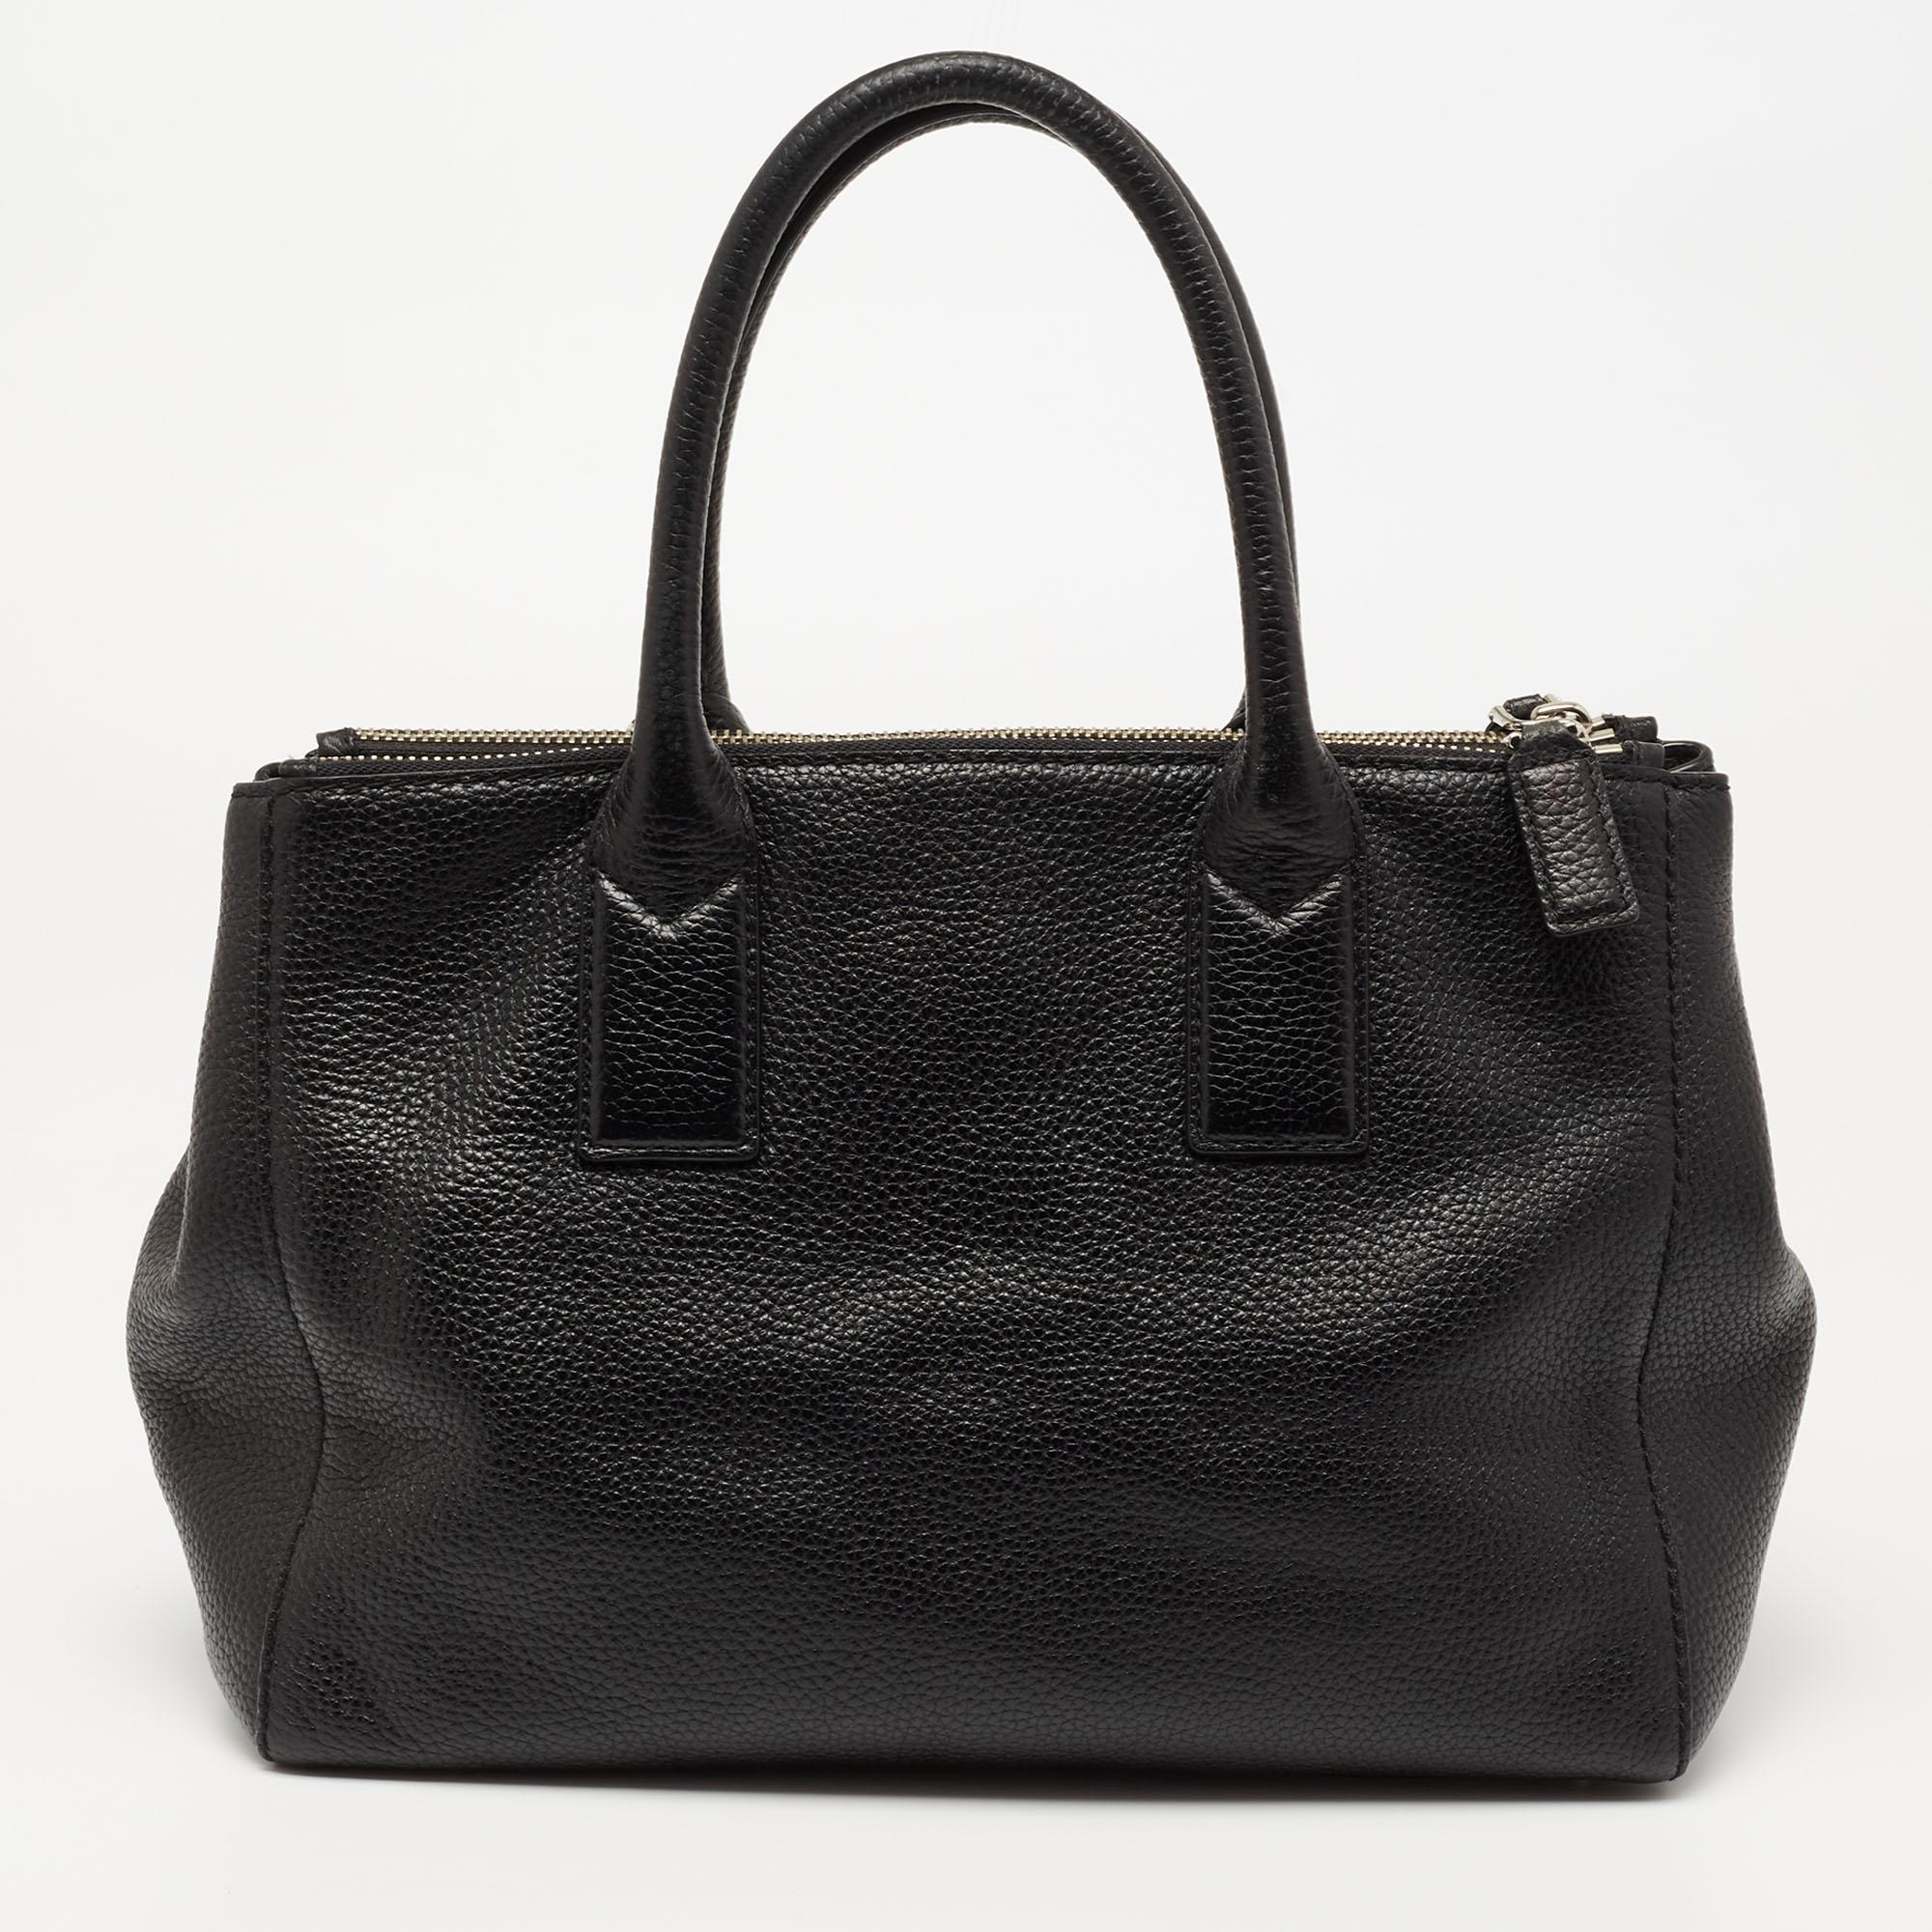 This Marc Jacobs tote promises to take you through the day with ease, whether you're at work or out and about in the city. From its design to its structure, the black leather bag promises charm and durability. It has dual top handles, an optional